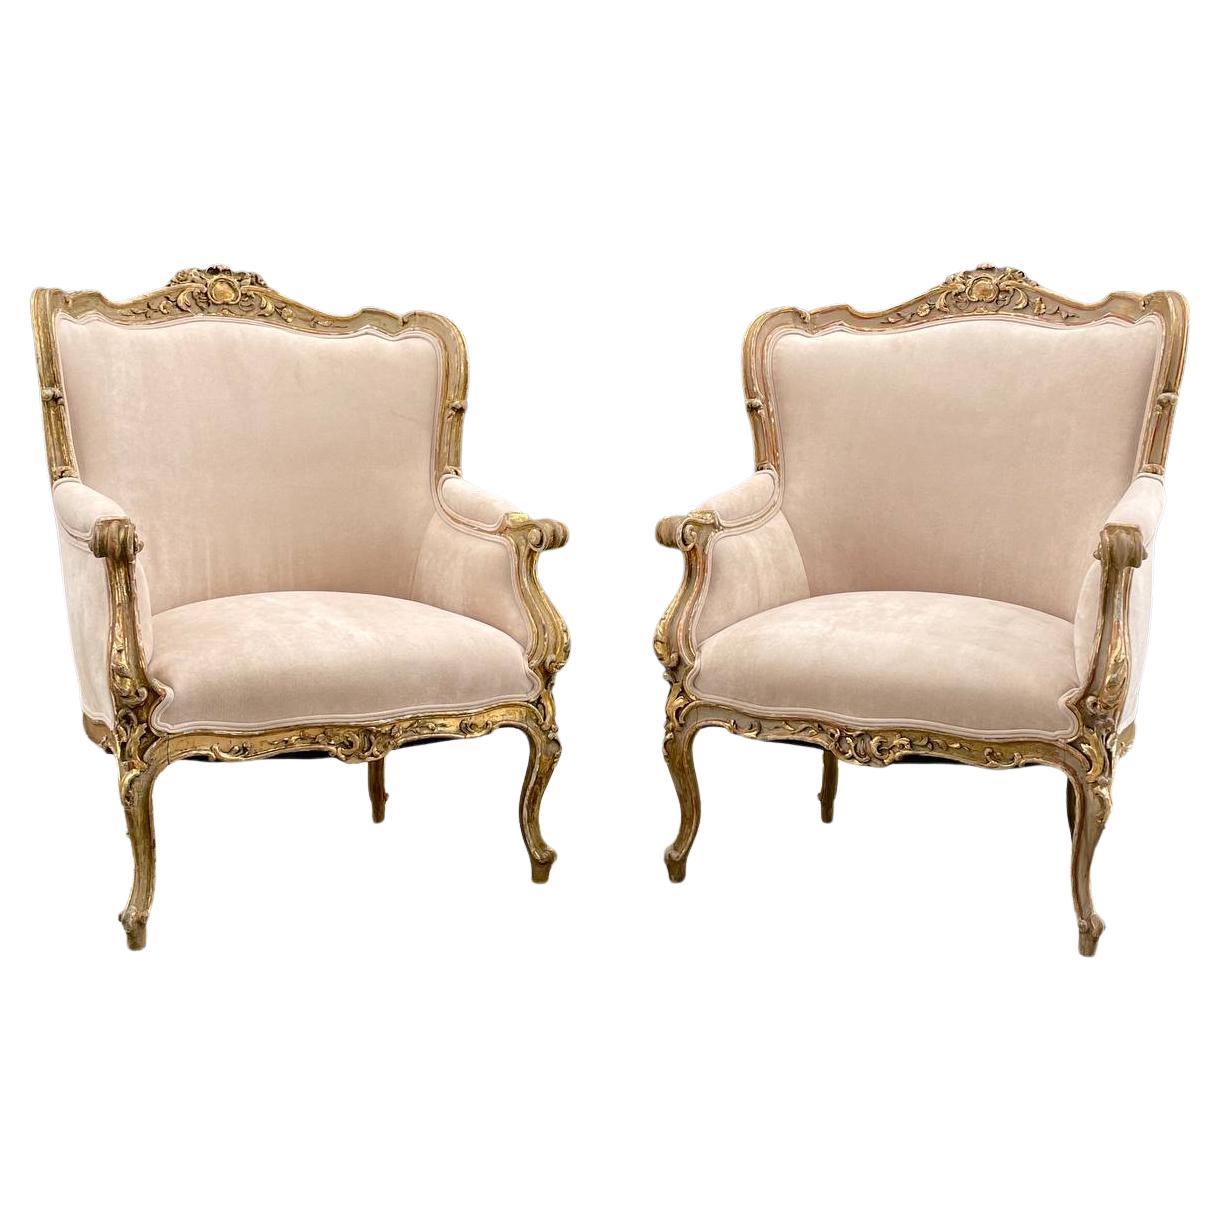 Pair of French Louis XV Style Painted & Parcel-Gilt Armchairs 